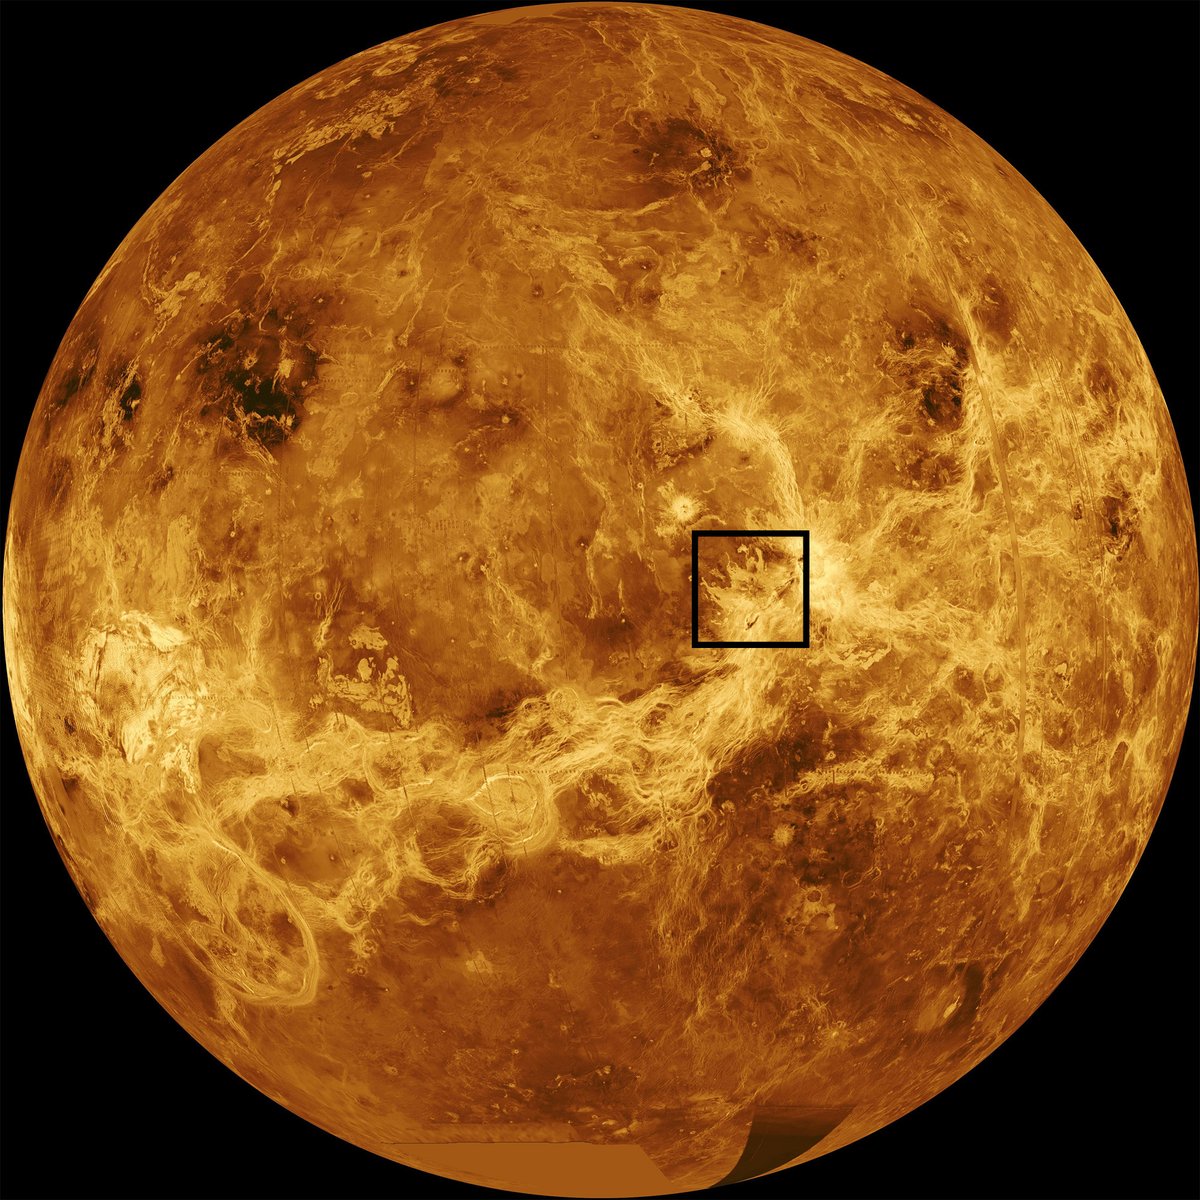 For the first time, scientists have observed direct geological evidence of an active volcano on Venus. 🌋 The @UAFGI and JPL team made the discovery after scouring archival radar images taken by @NASA’s Magellan mission more than 30 years ago. go.nasa.gov/3mR6wgG